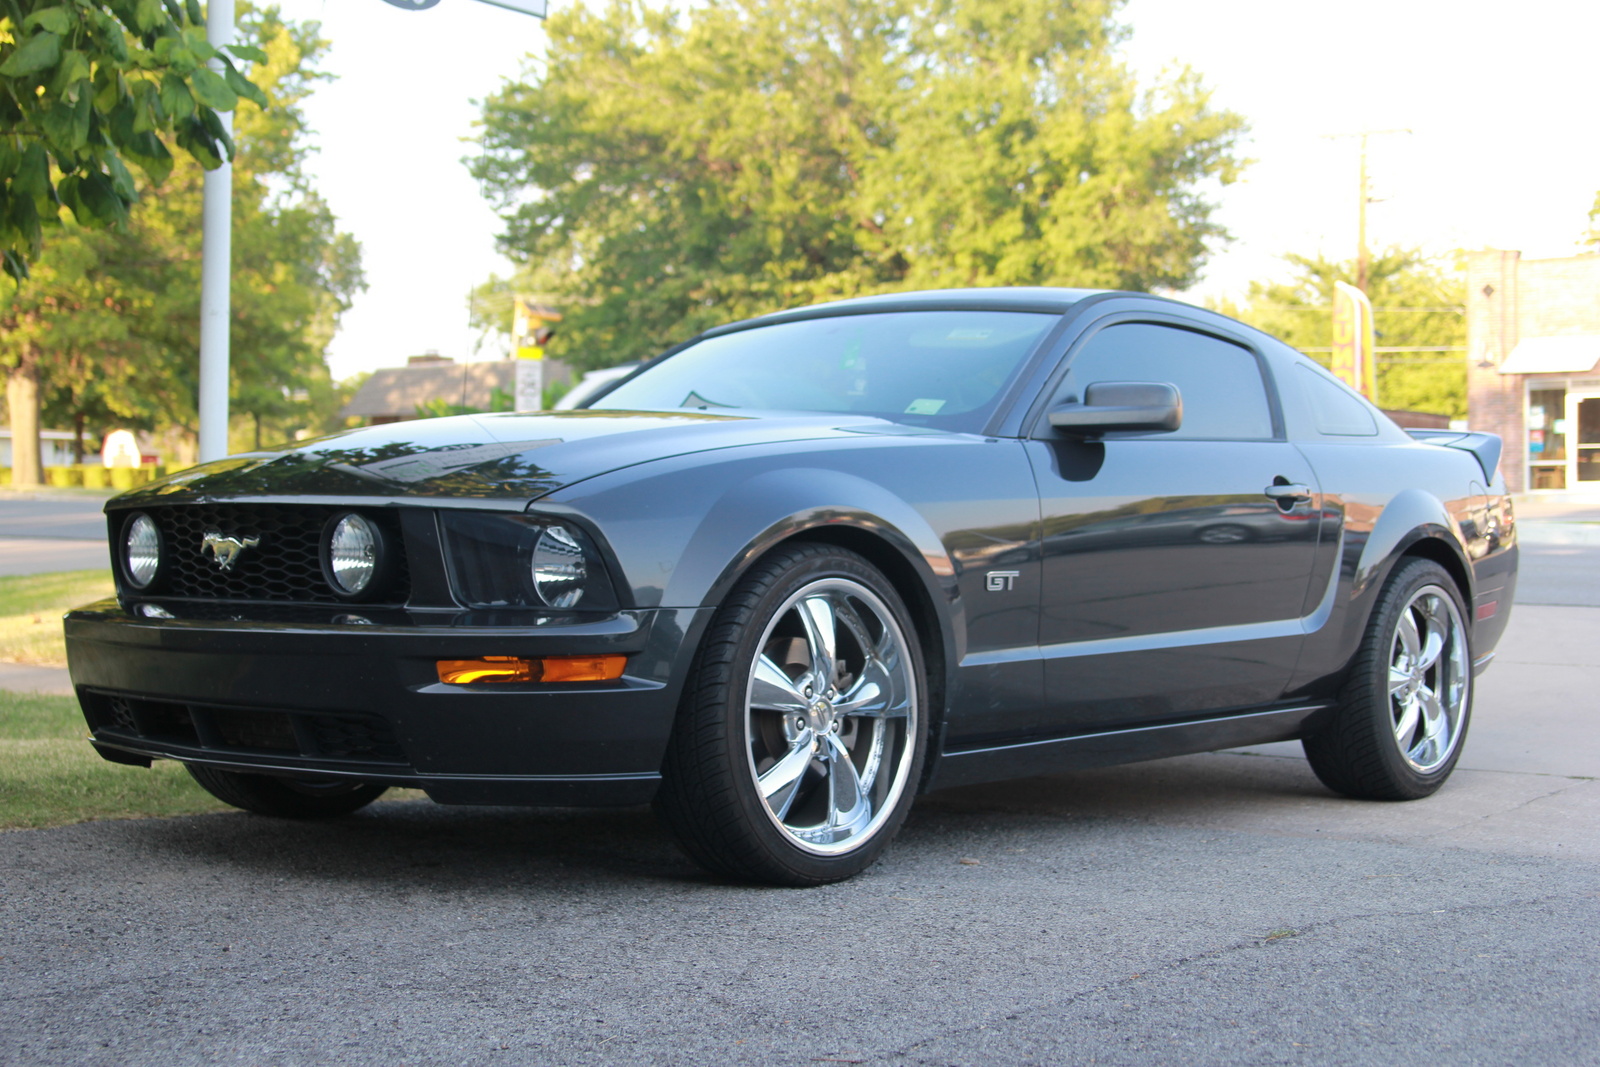 Used ford mustangs in tulsa oklahoma #3